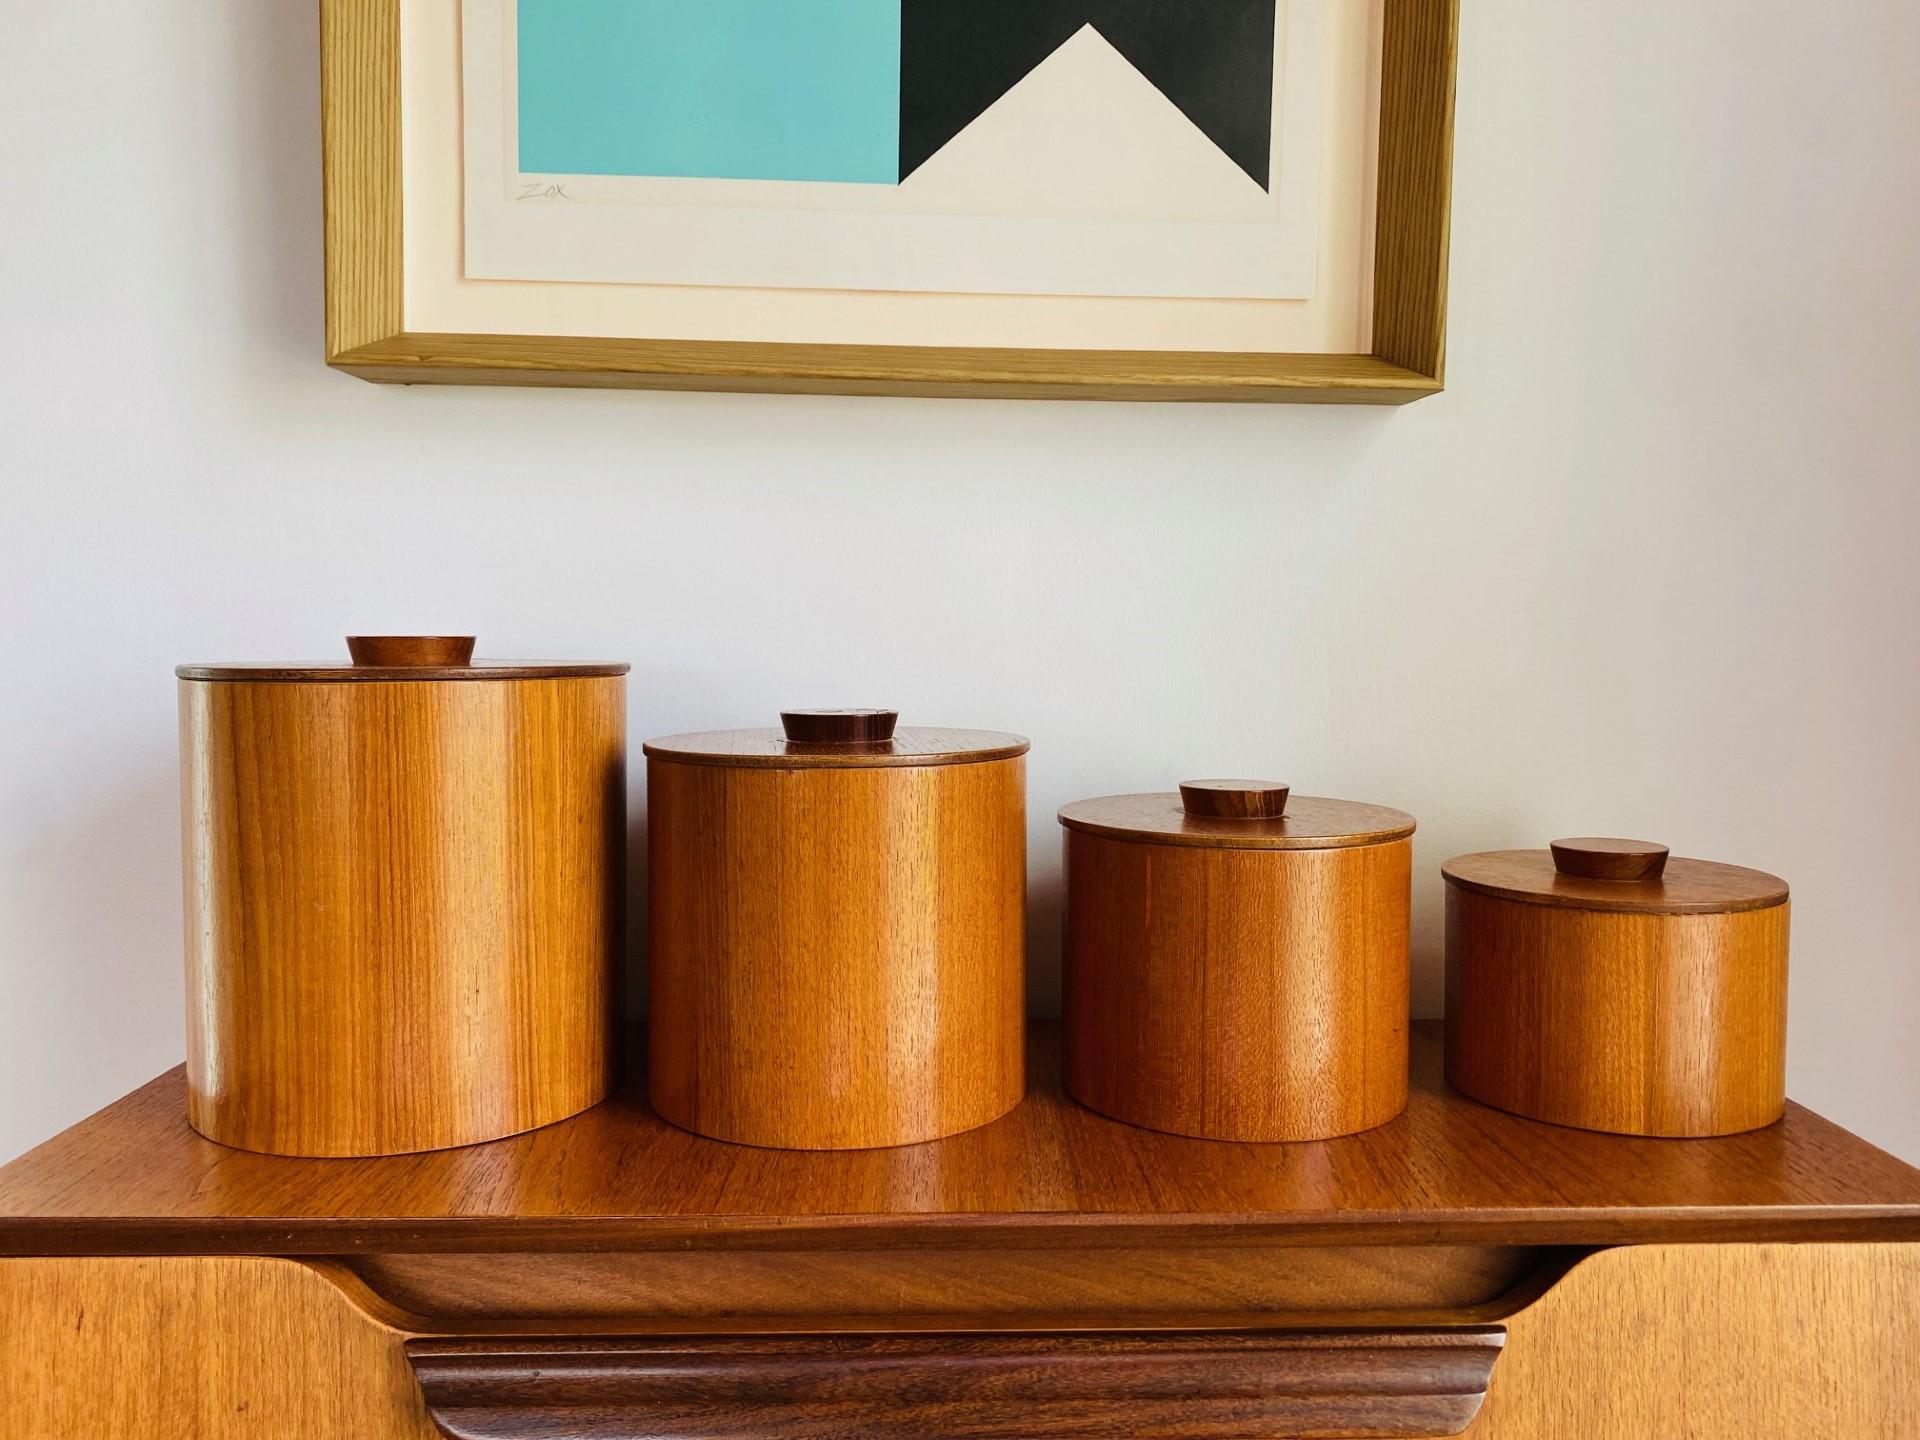 Rare Vintage Set of 4 Nesting Teak Canisters from Japan Mid-Century 1960s For Sale 2